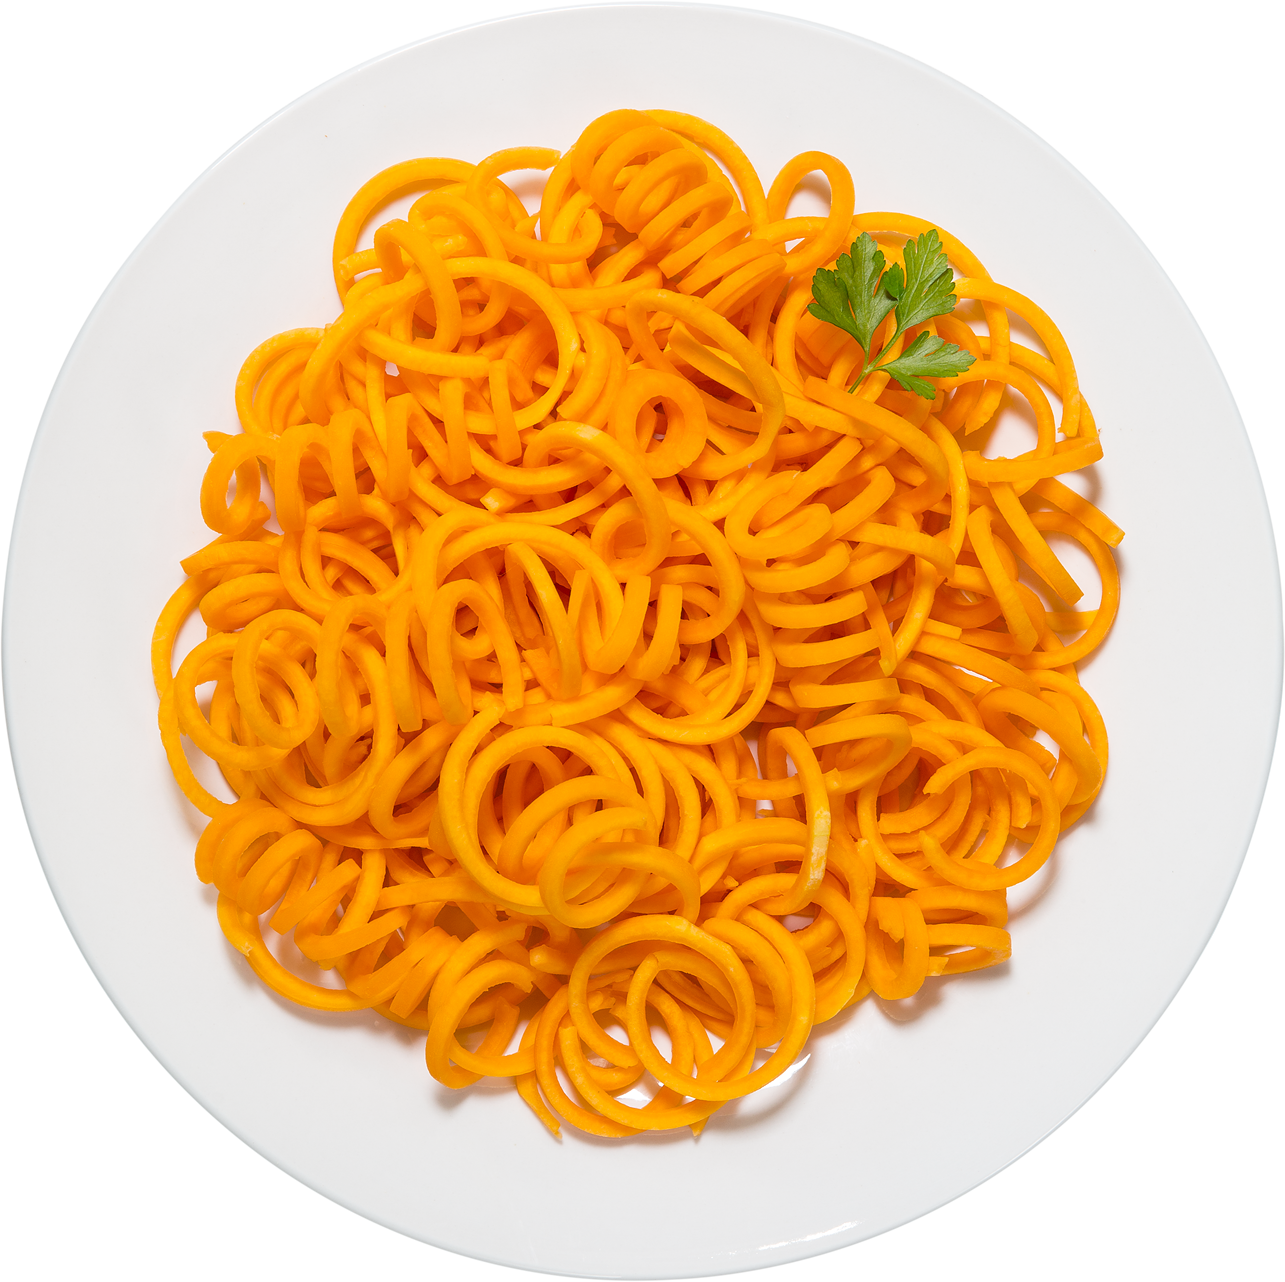 A Plate Of Noodles On A Black Background